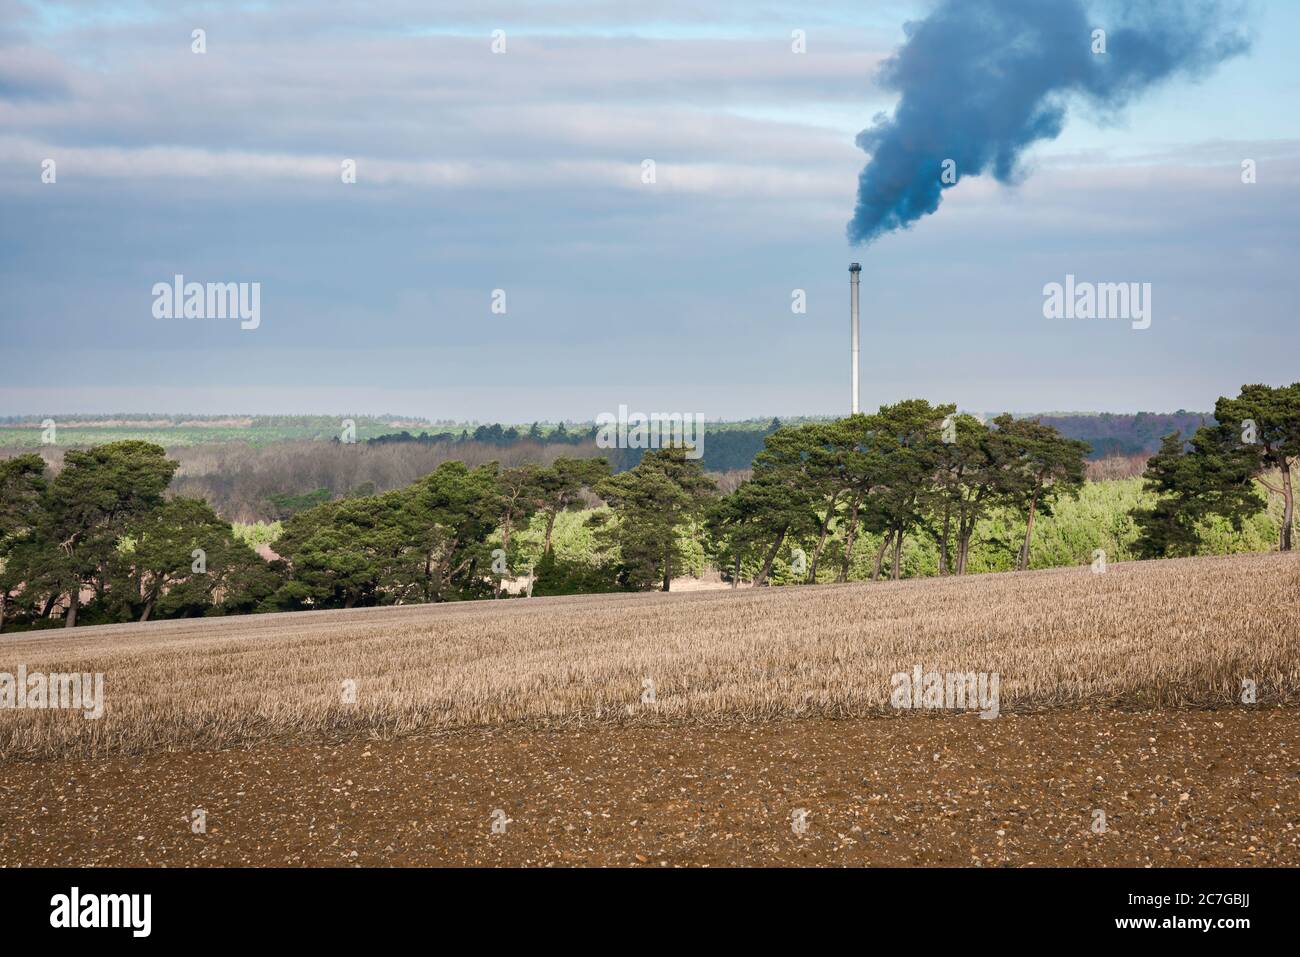 Pollution countryside, view of a power plant chimney emitting smoke in Breckland, rural Norfolk, England, UK Stock Photo